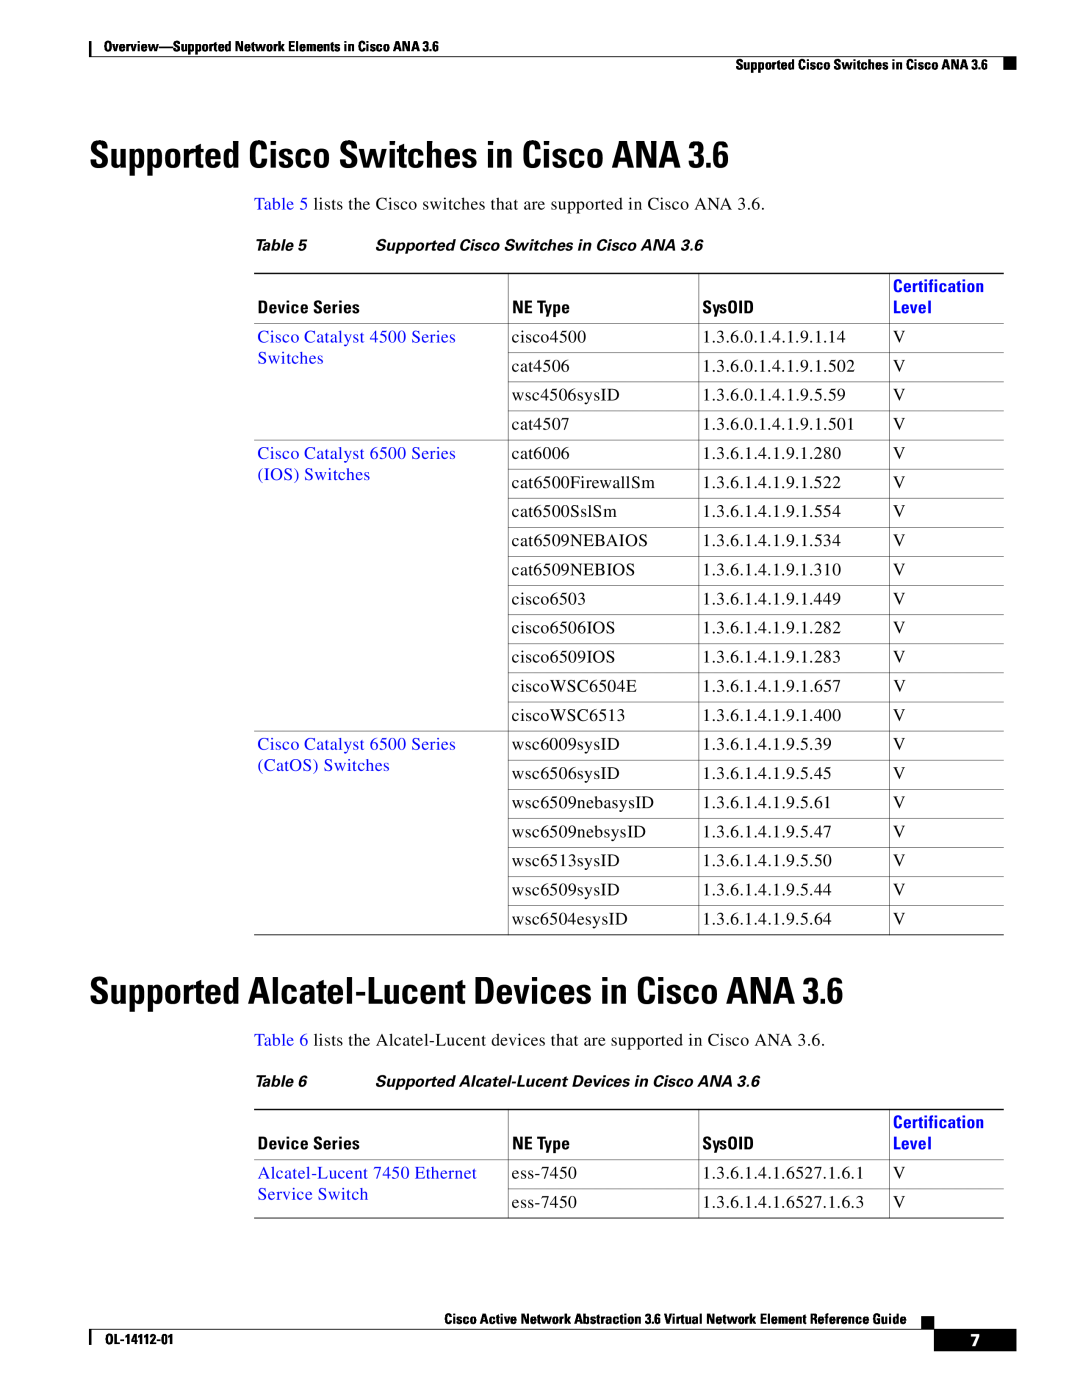 Cisco Systems 3.6 manual Supported Cisco Switches in Cisco ANA, Supported Alcatel-Lucent Devices in Cisco ANA, IOS Switches 